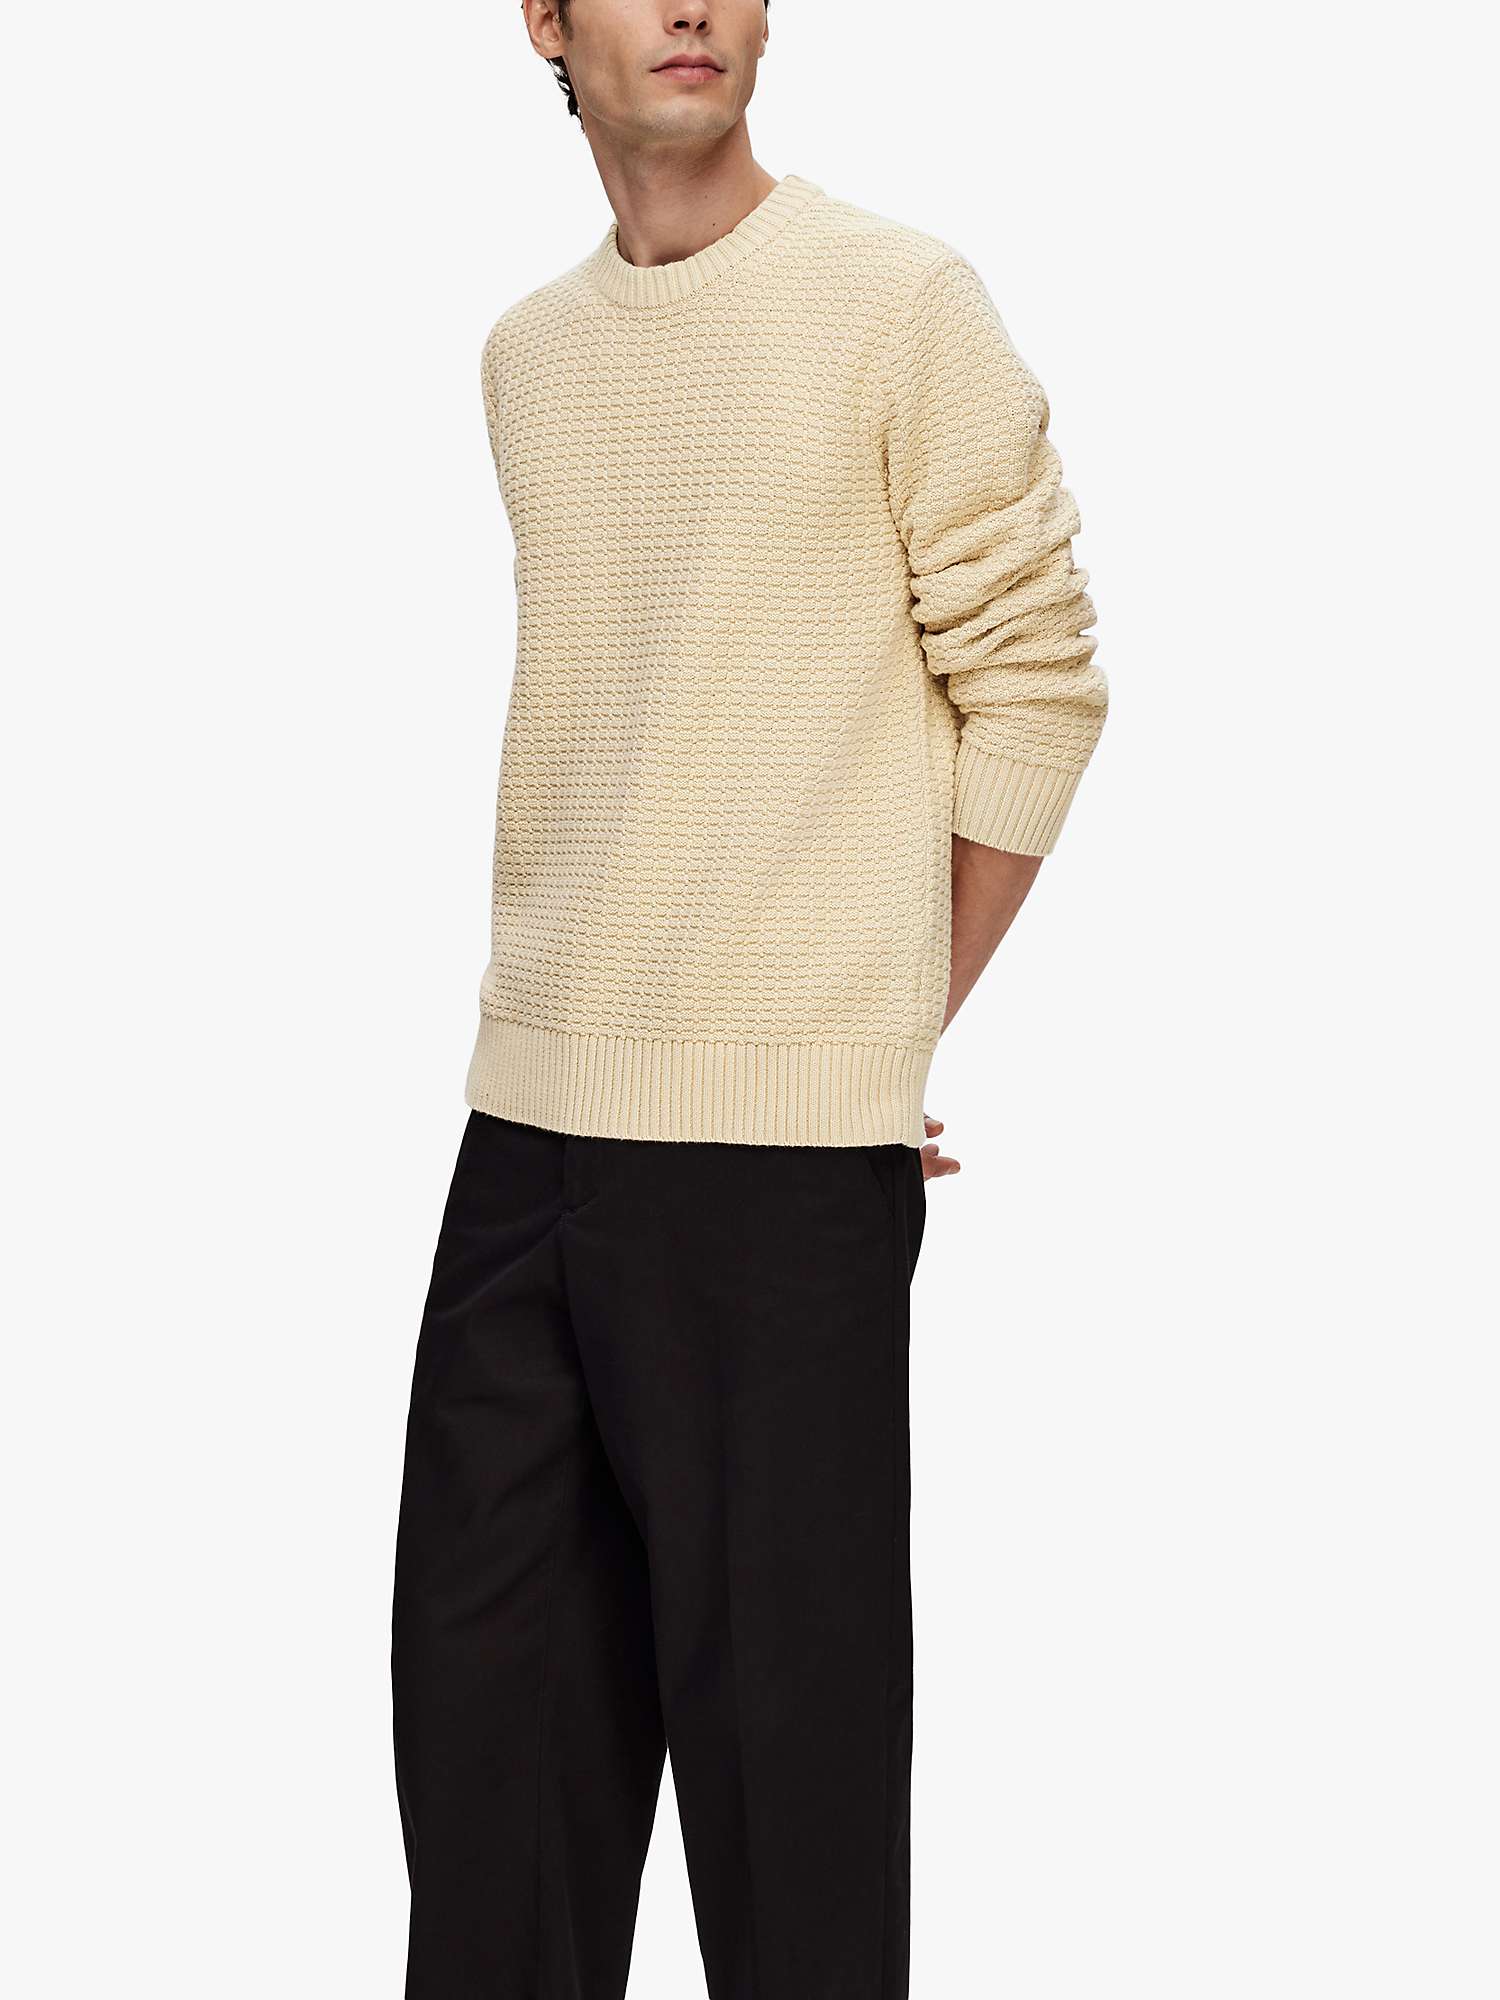 SELECTED HOMME Organic Cotton Stitch Jumper, Oatmeal at John Lewis ...